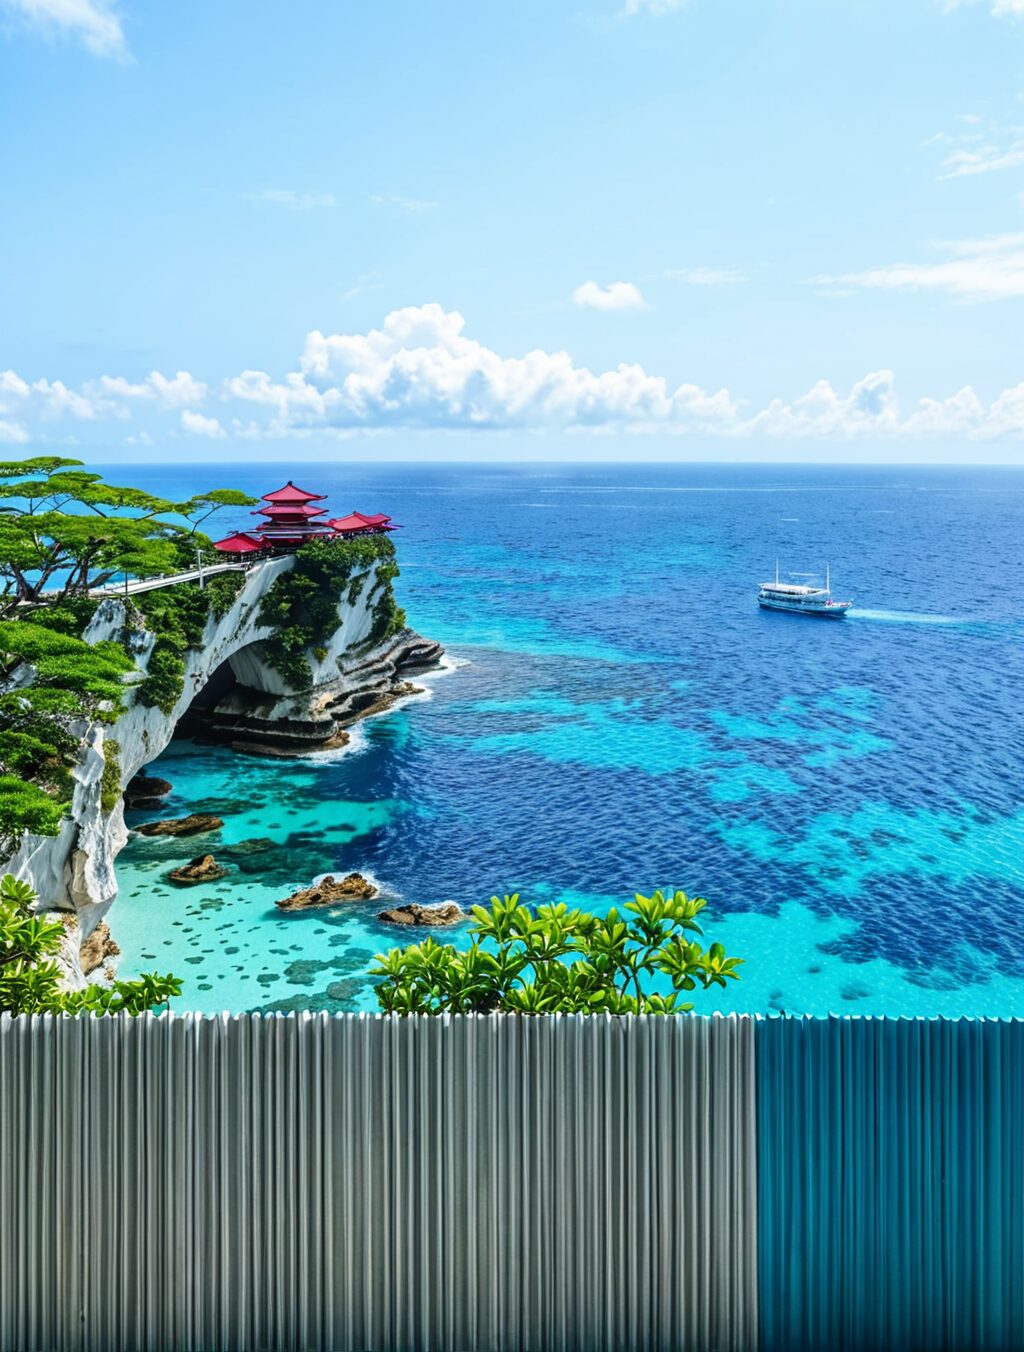 best time of year to visit okinawa japan